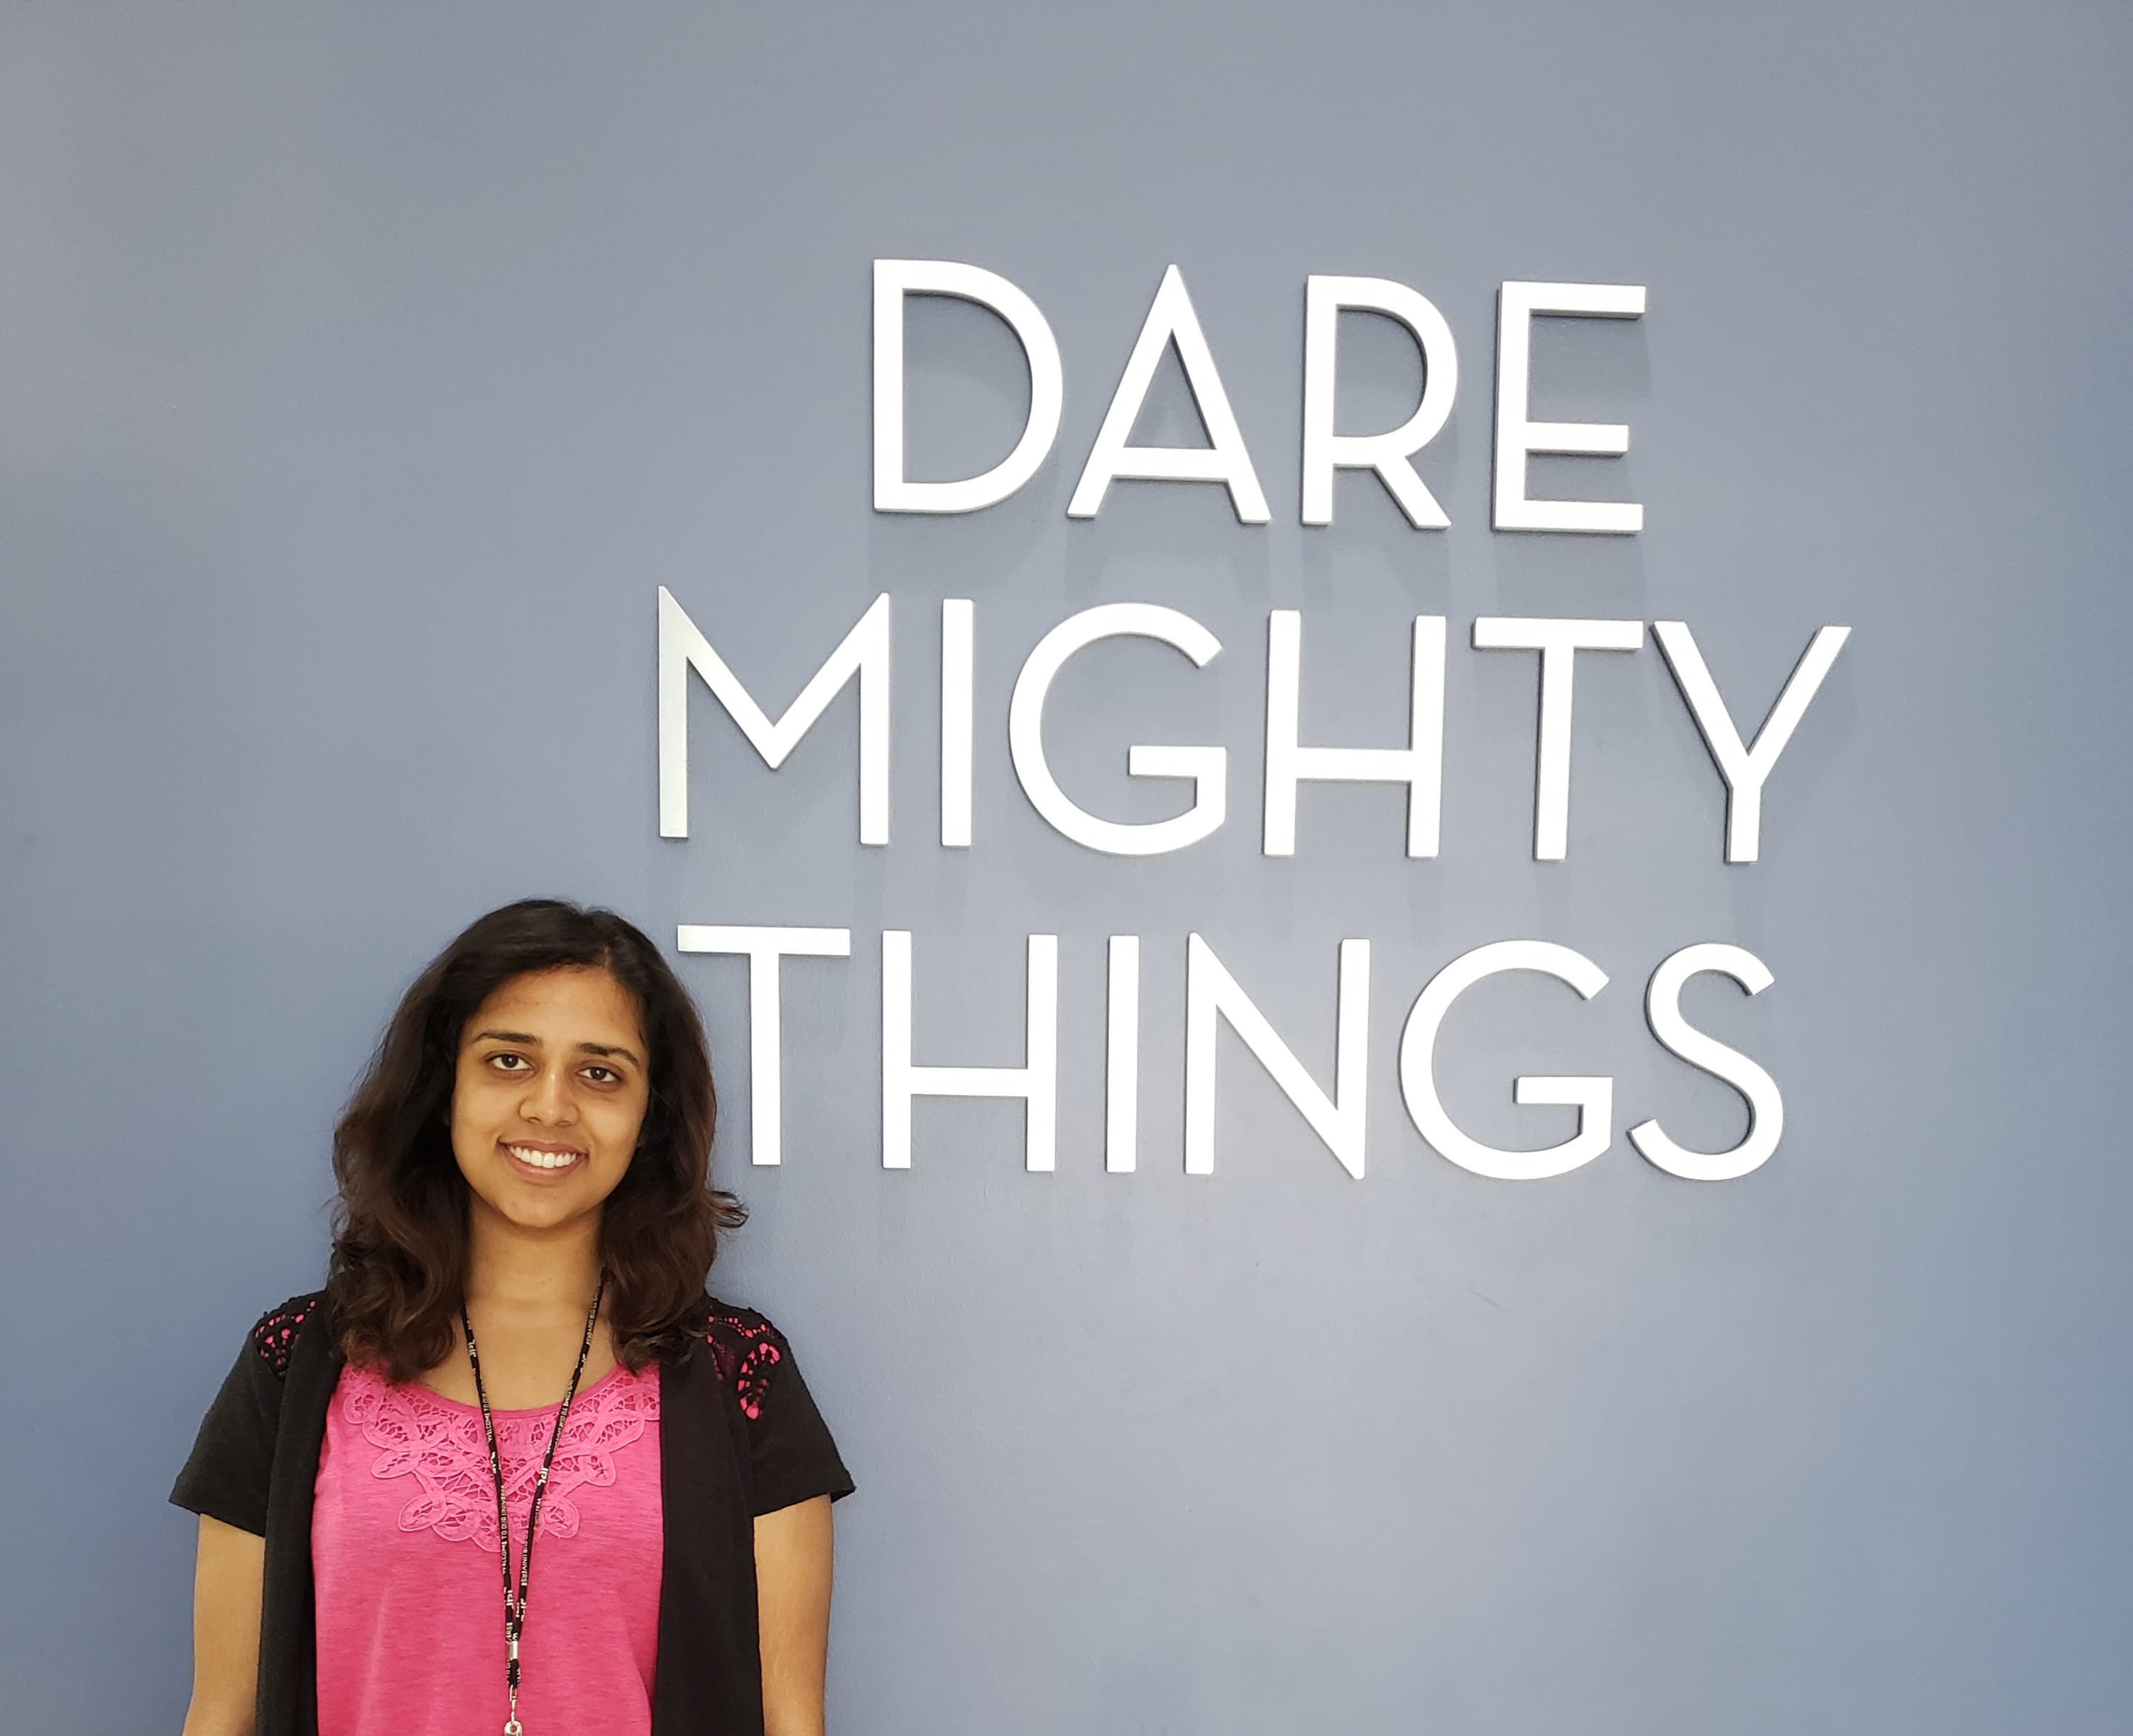 JPL computer scientist Jagriti Agrawal is working on the next Mars rover mission